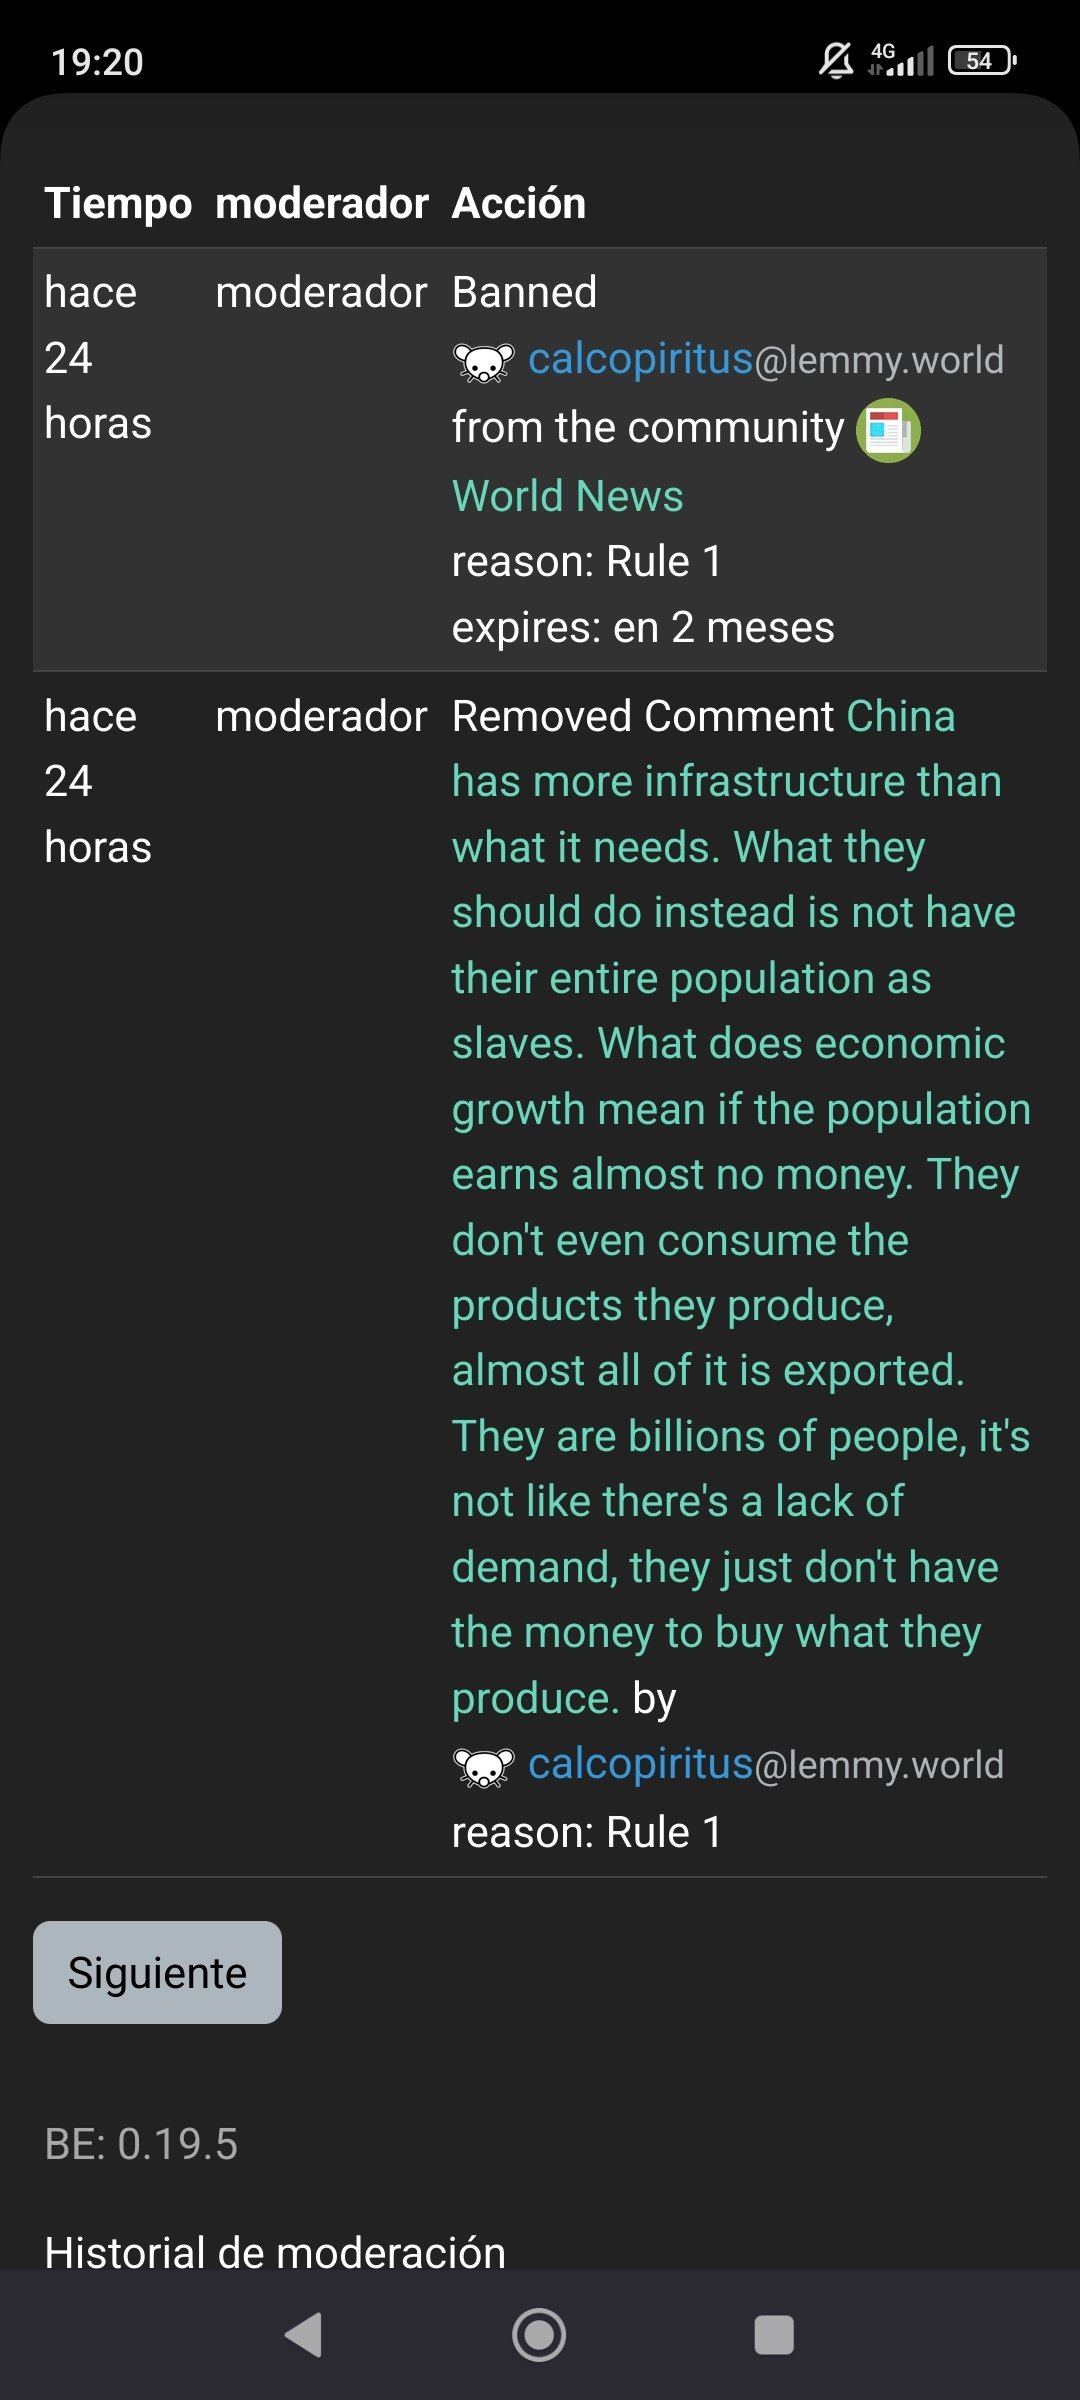 I guess it's racist to criticize the unelected government of china now.